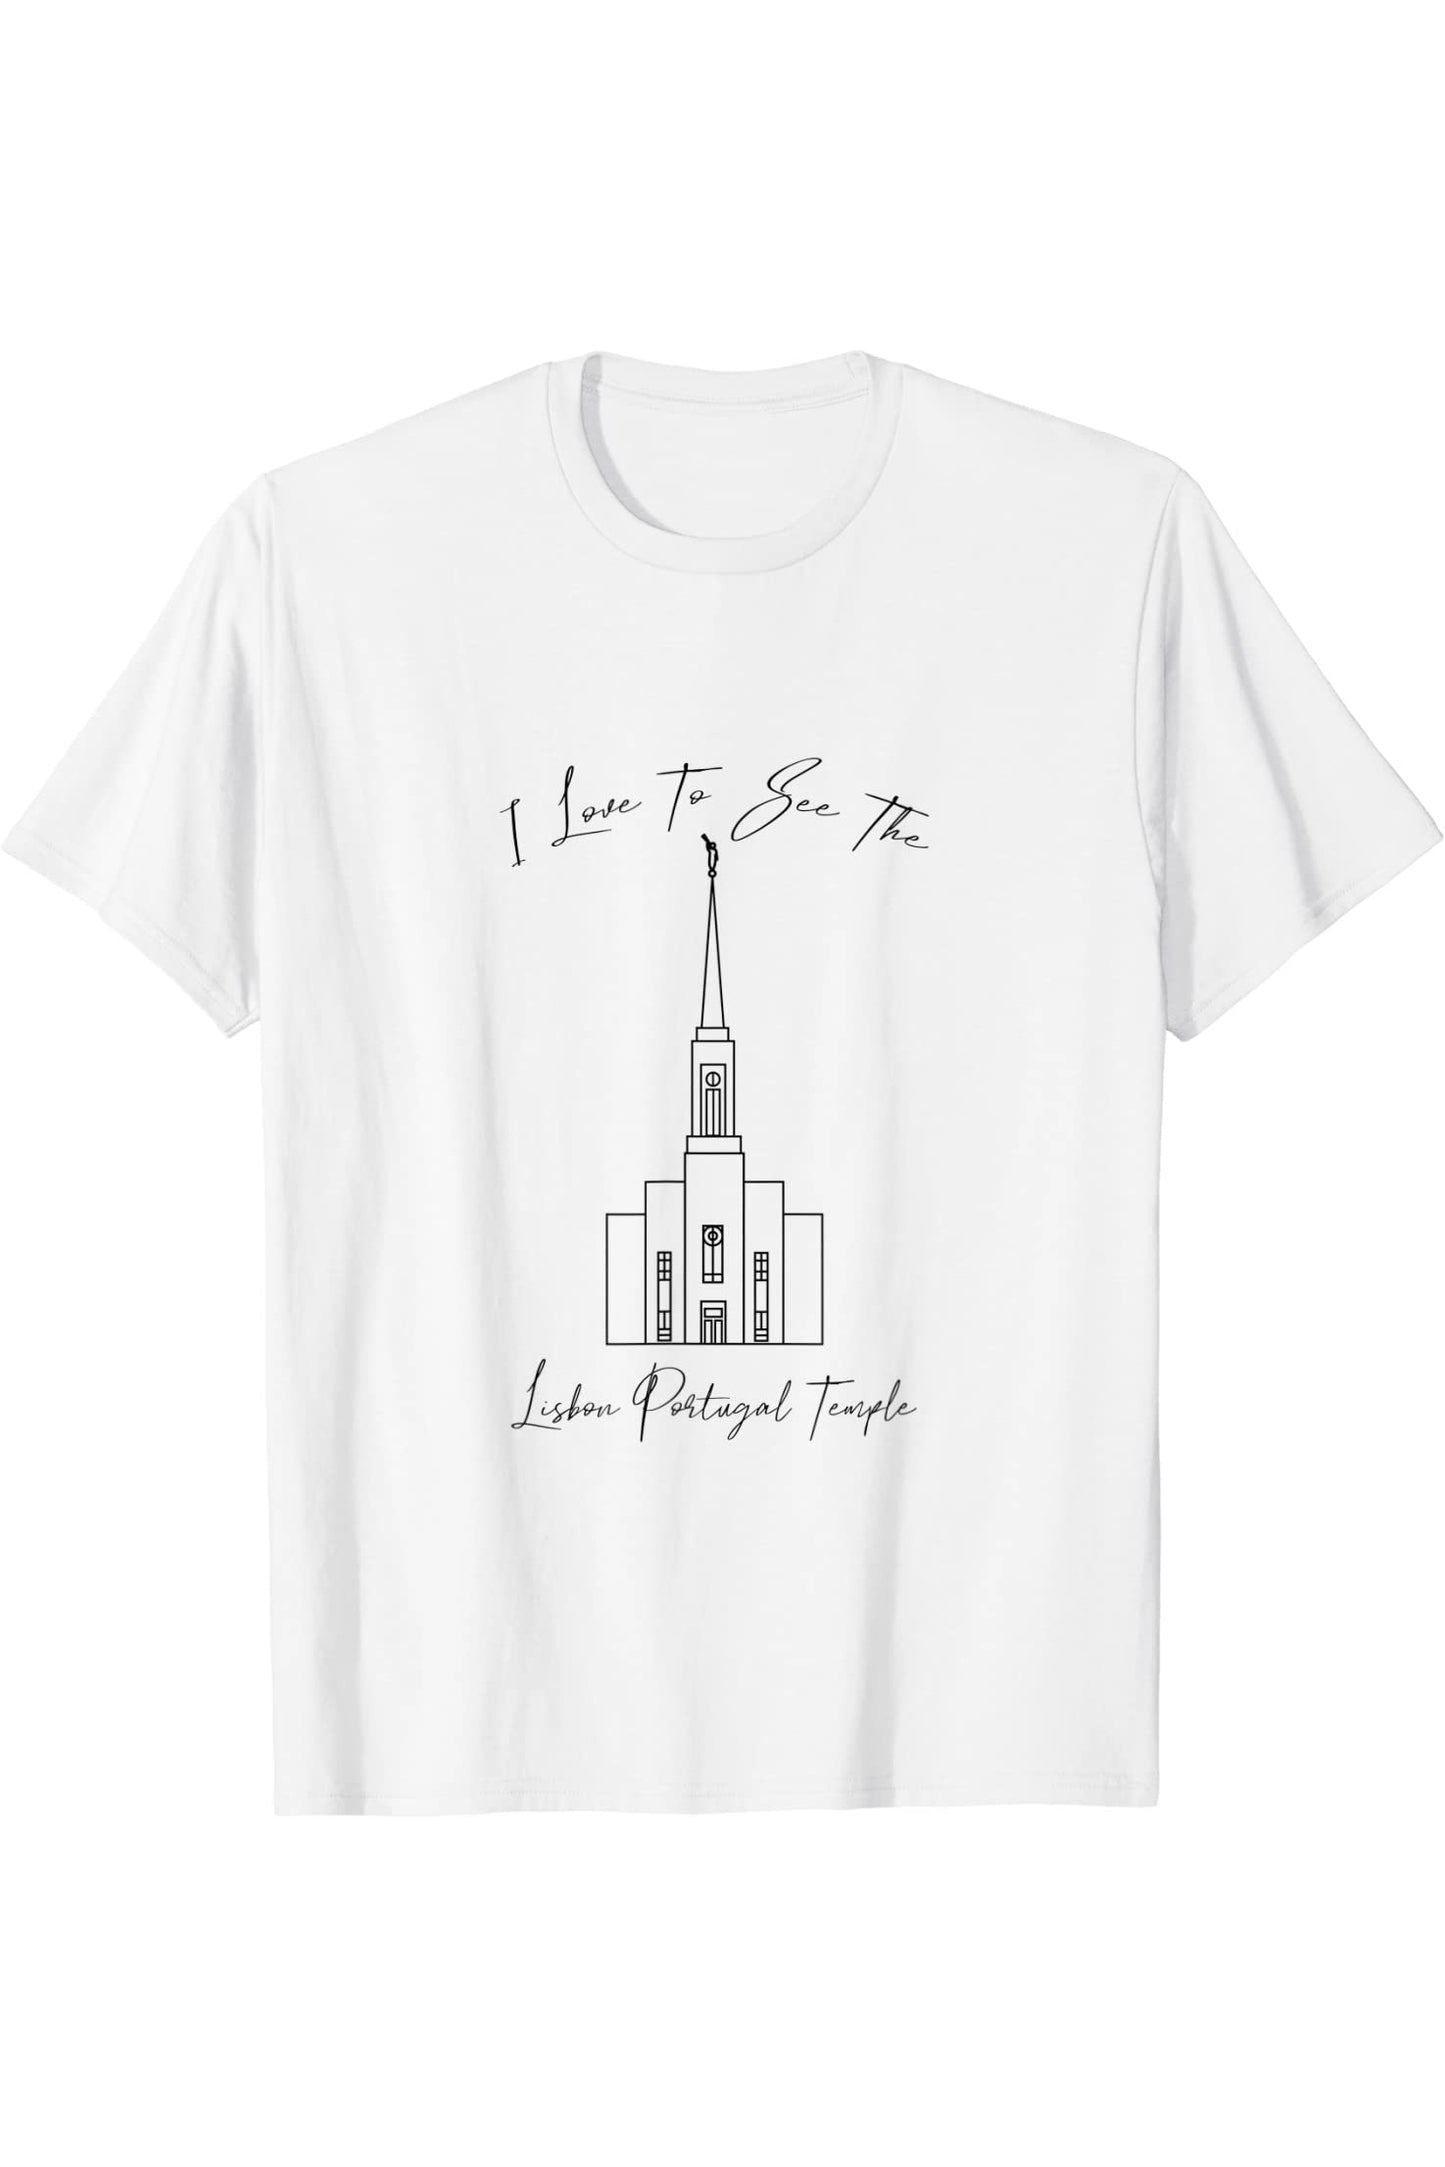 Lisbon Portugal Temple T-Shirt - Calligraphy Style (English) US